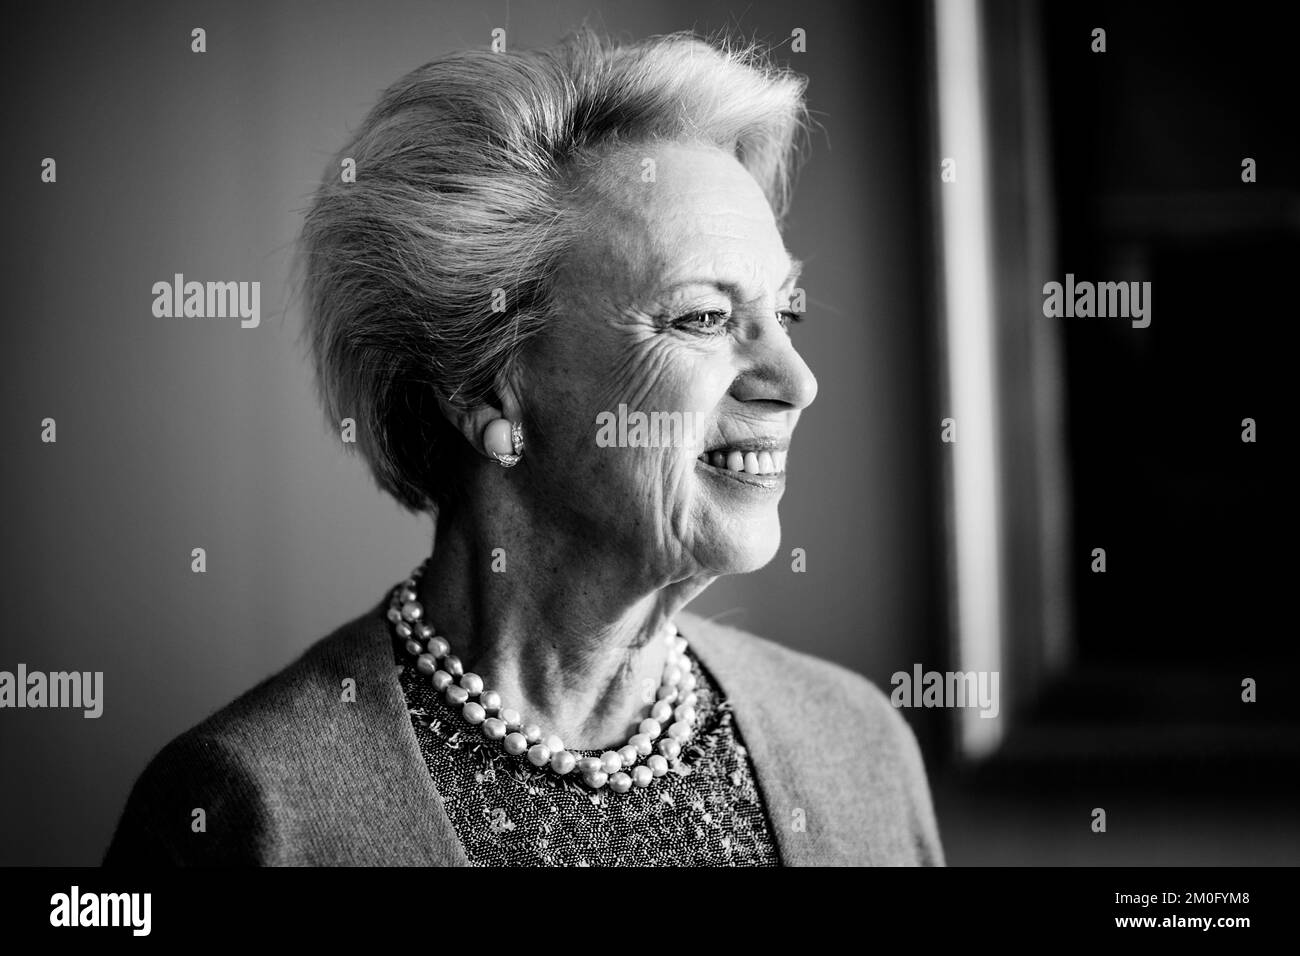 HRH Princess Benedikte celebrates her 75th birthday on April 29th 2019. For the occasion she has had new portraits taken of her in her apartment at Amalienborg Palace. Photographed on April 24th Stock Photo